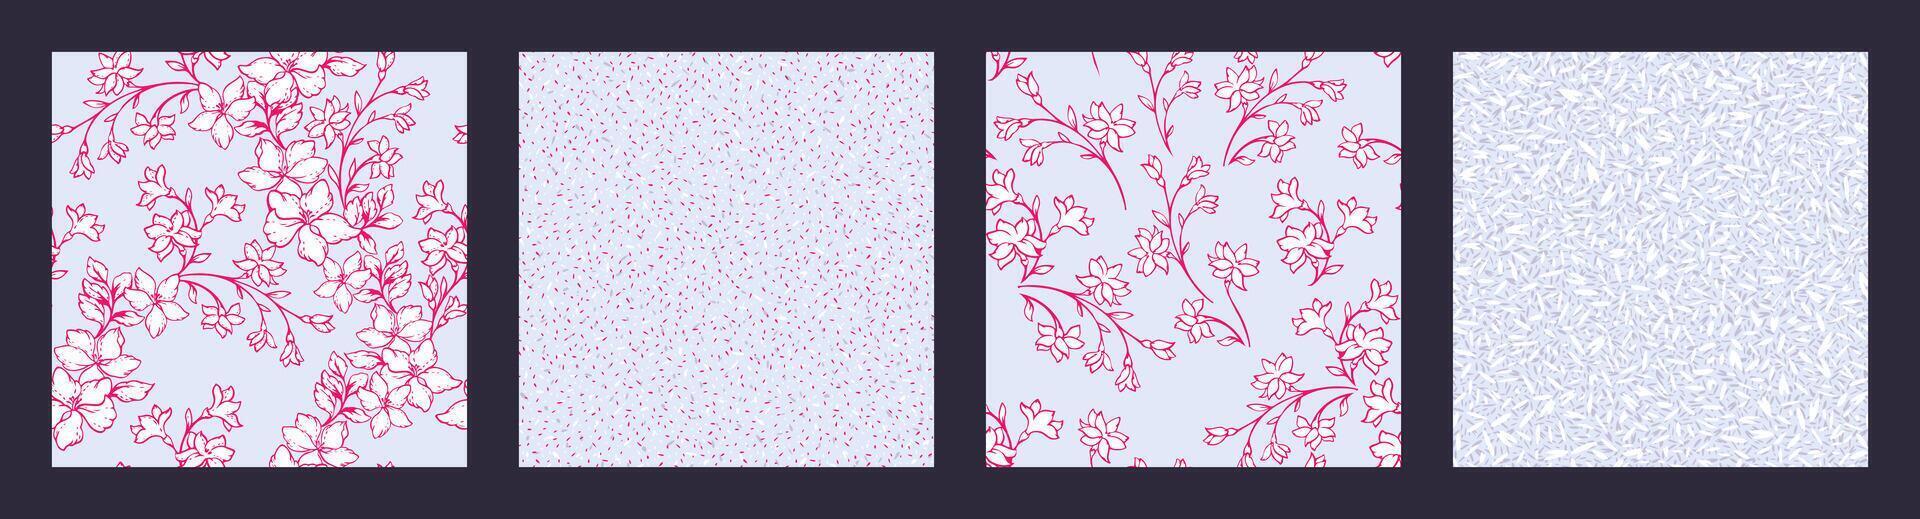 Pastel blue collage of set seamless patterns with stylized blooming tiny wild  branches flowers, texture shapes, random spots, polka dots. Vector hand drawn sketch. Templates for design, printing